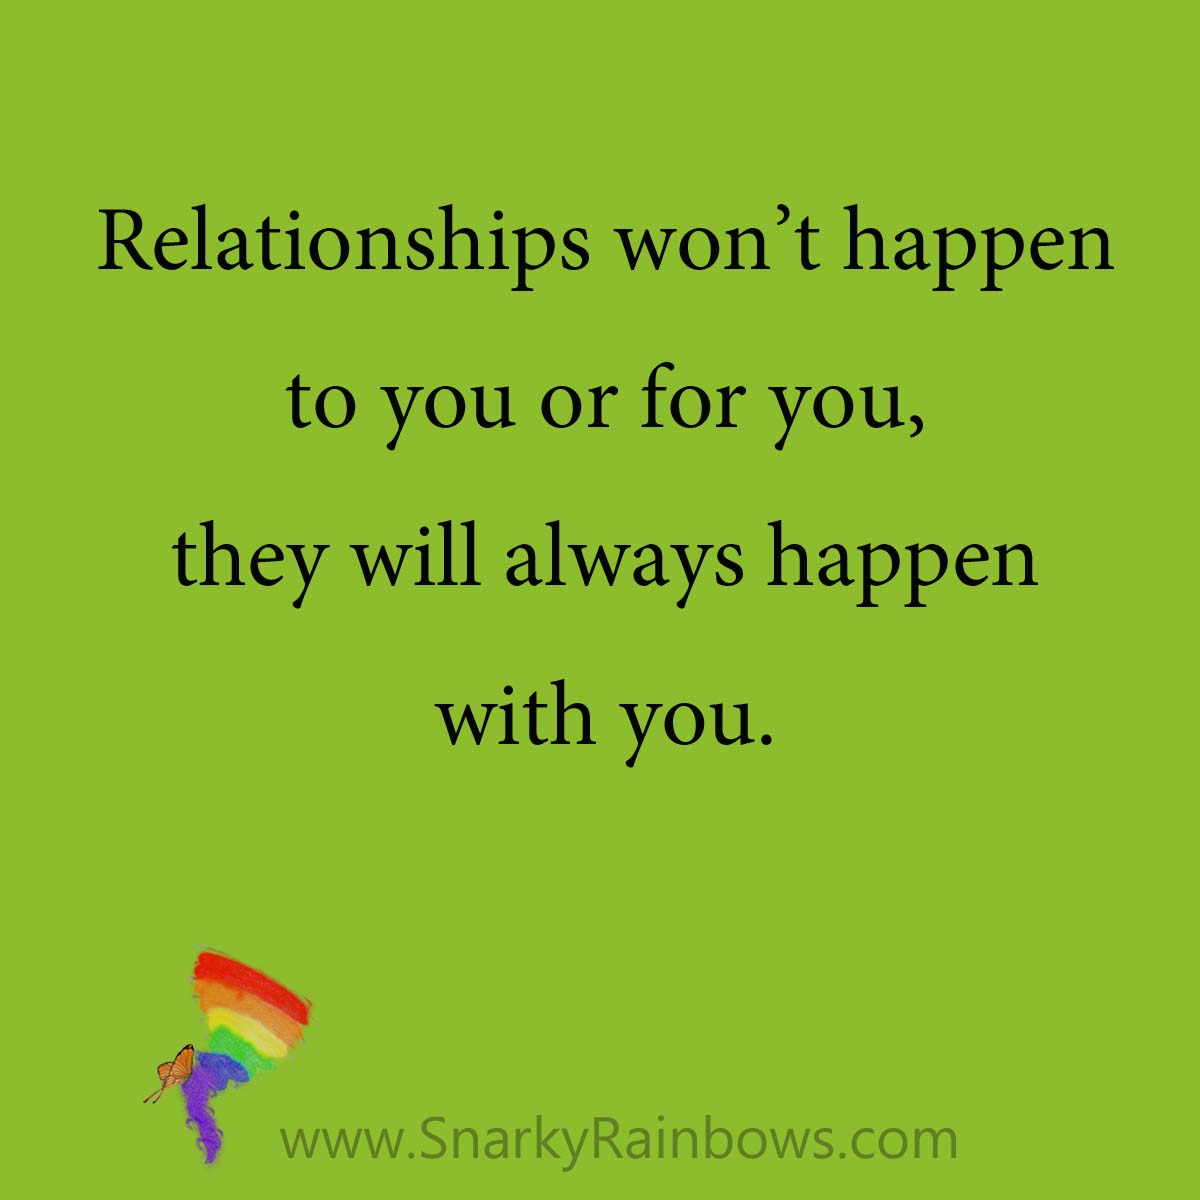 Quote - relationships happen with you